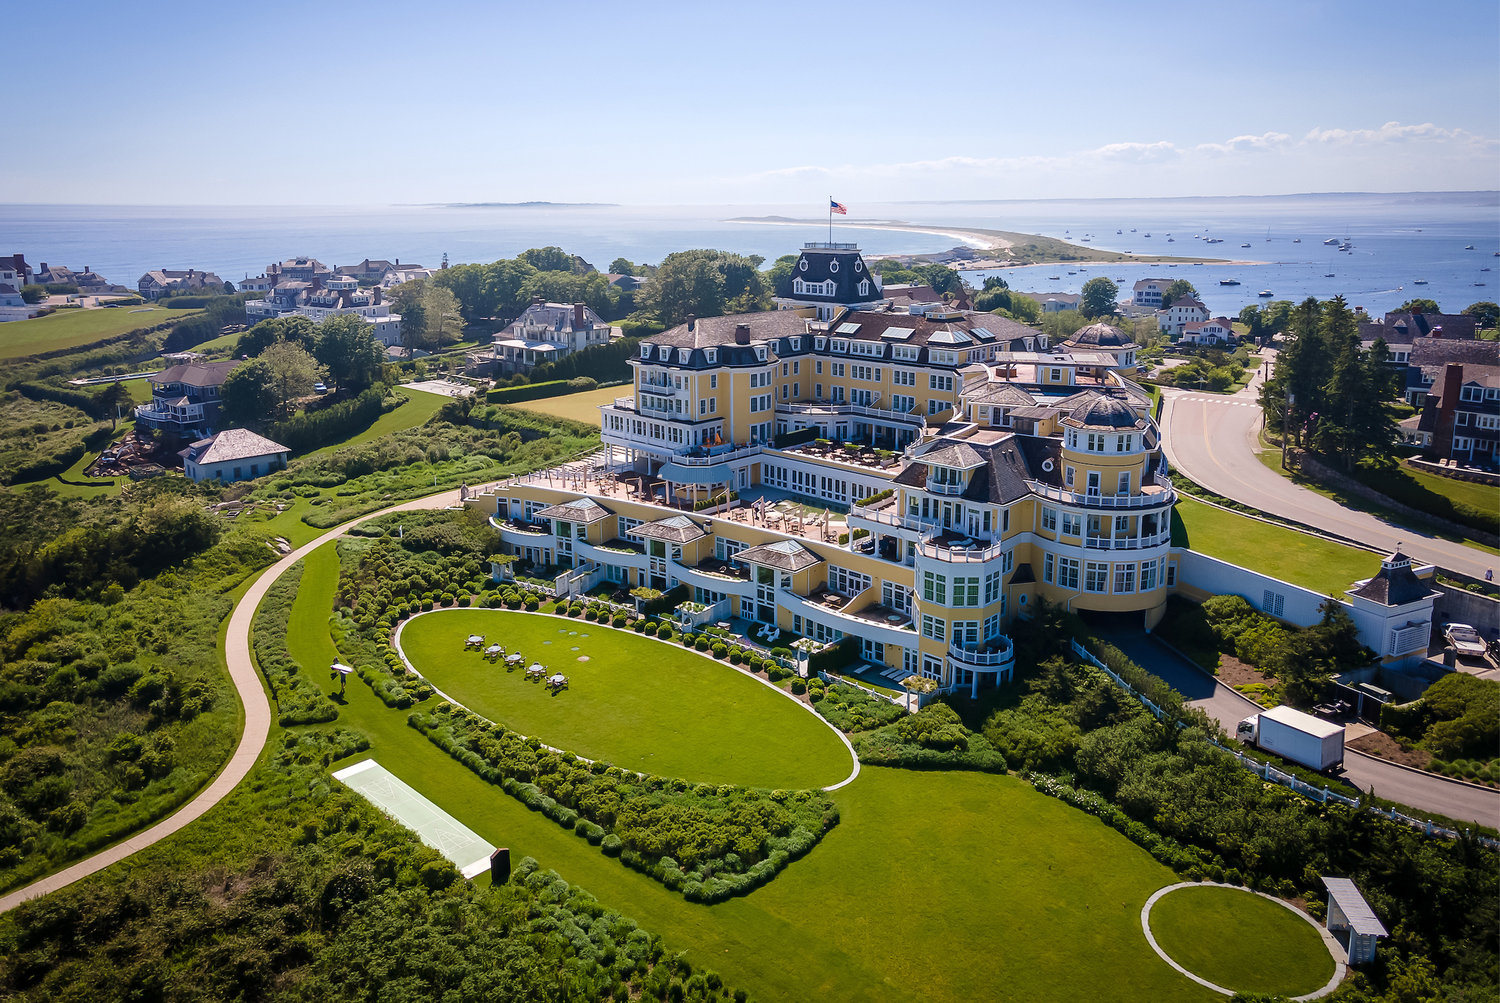 Ocean House is one of 14 Triple Five-Star Hotels in the world